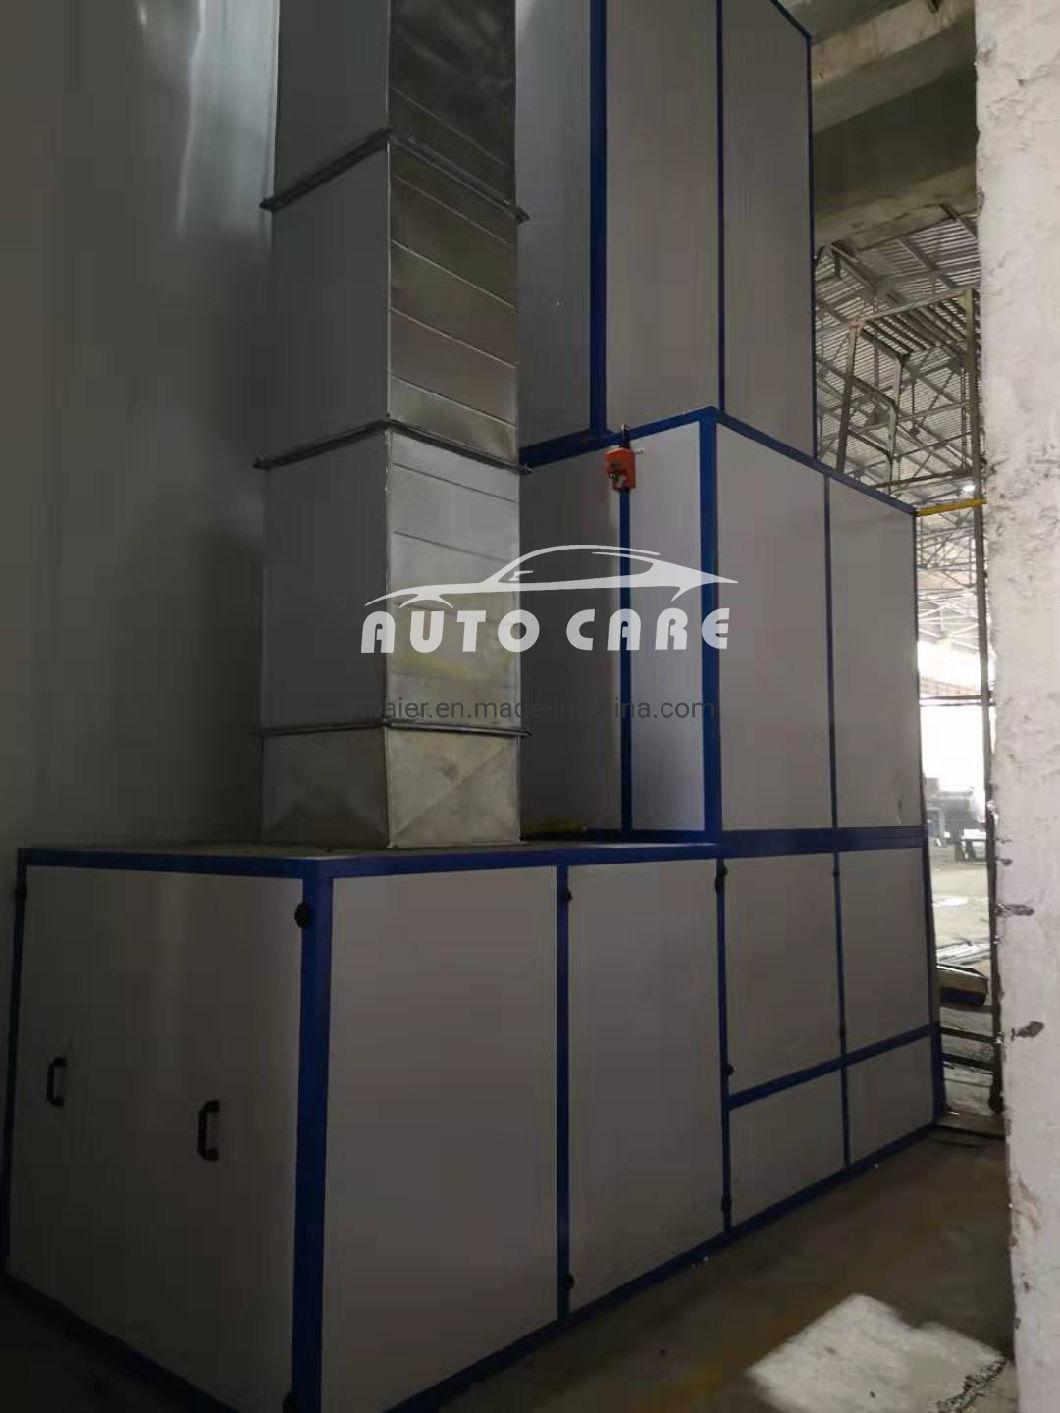 Ce Approved Industrial Truck/Bus Paint Booth with High Quality